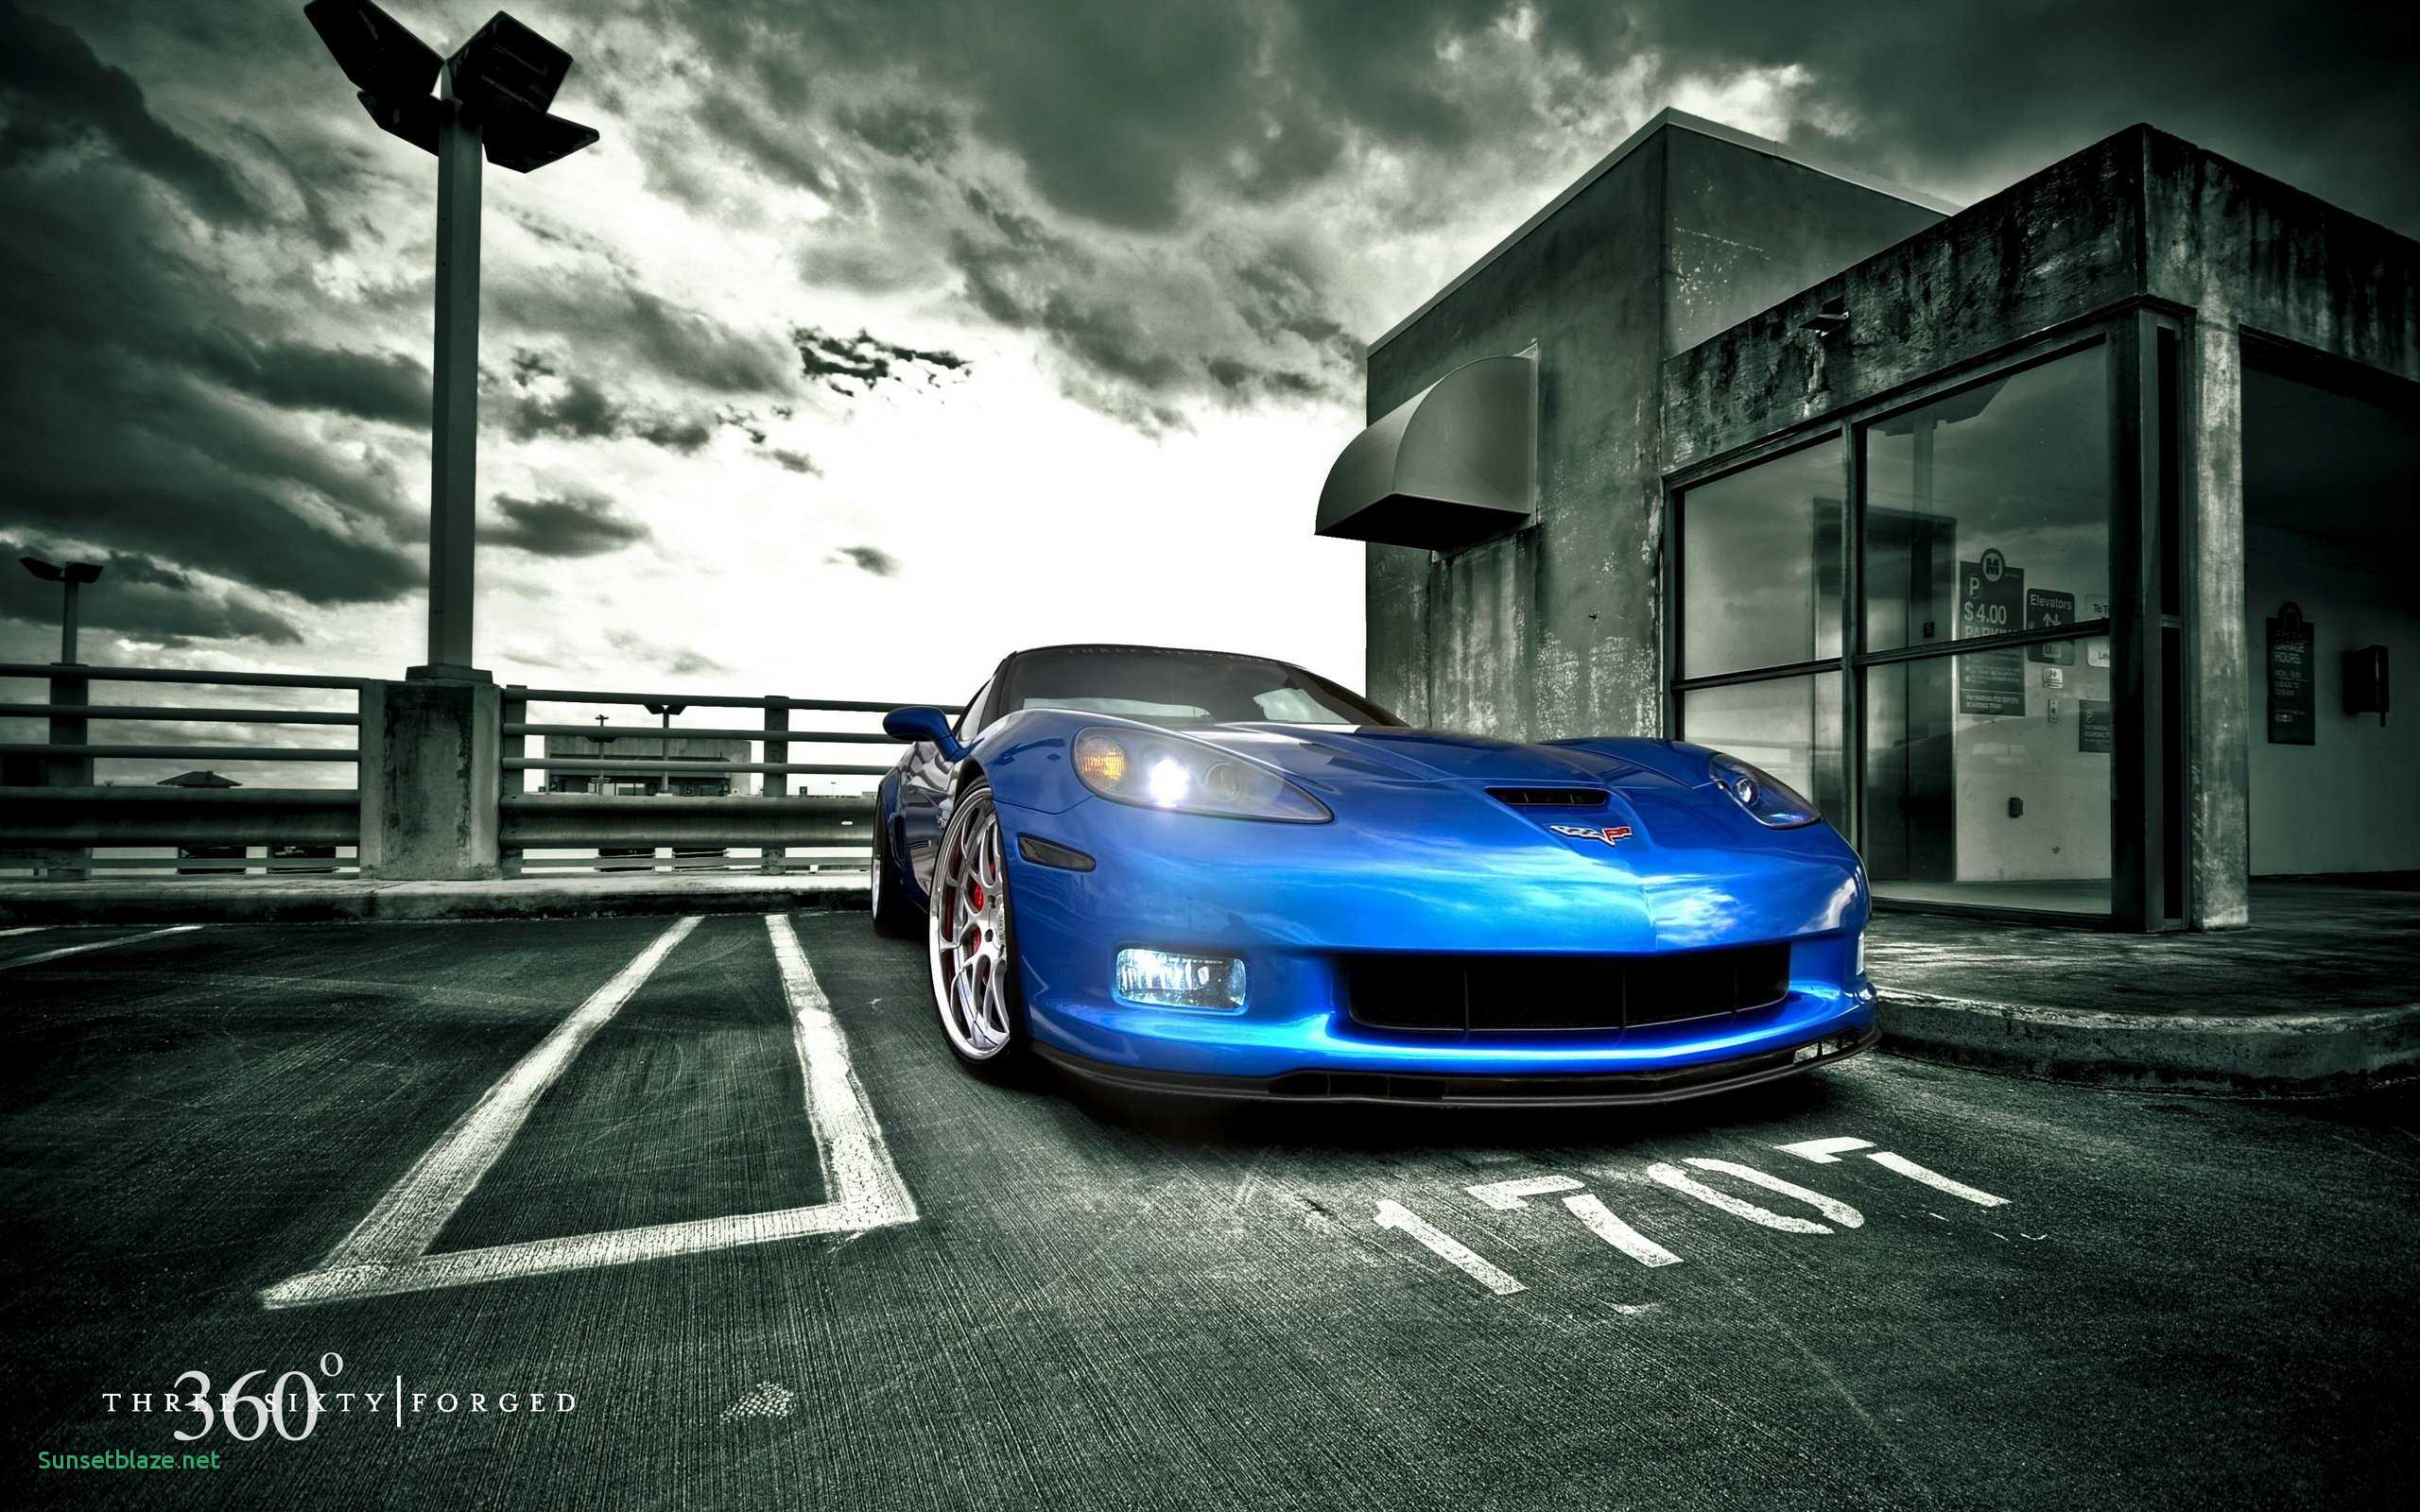 39+ Car Hd Wallpapers For Windows 7 full HD